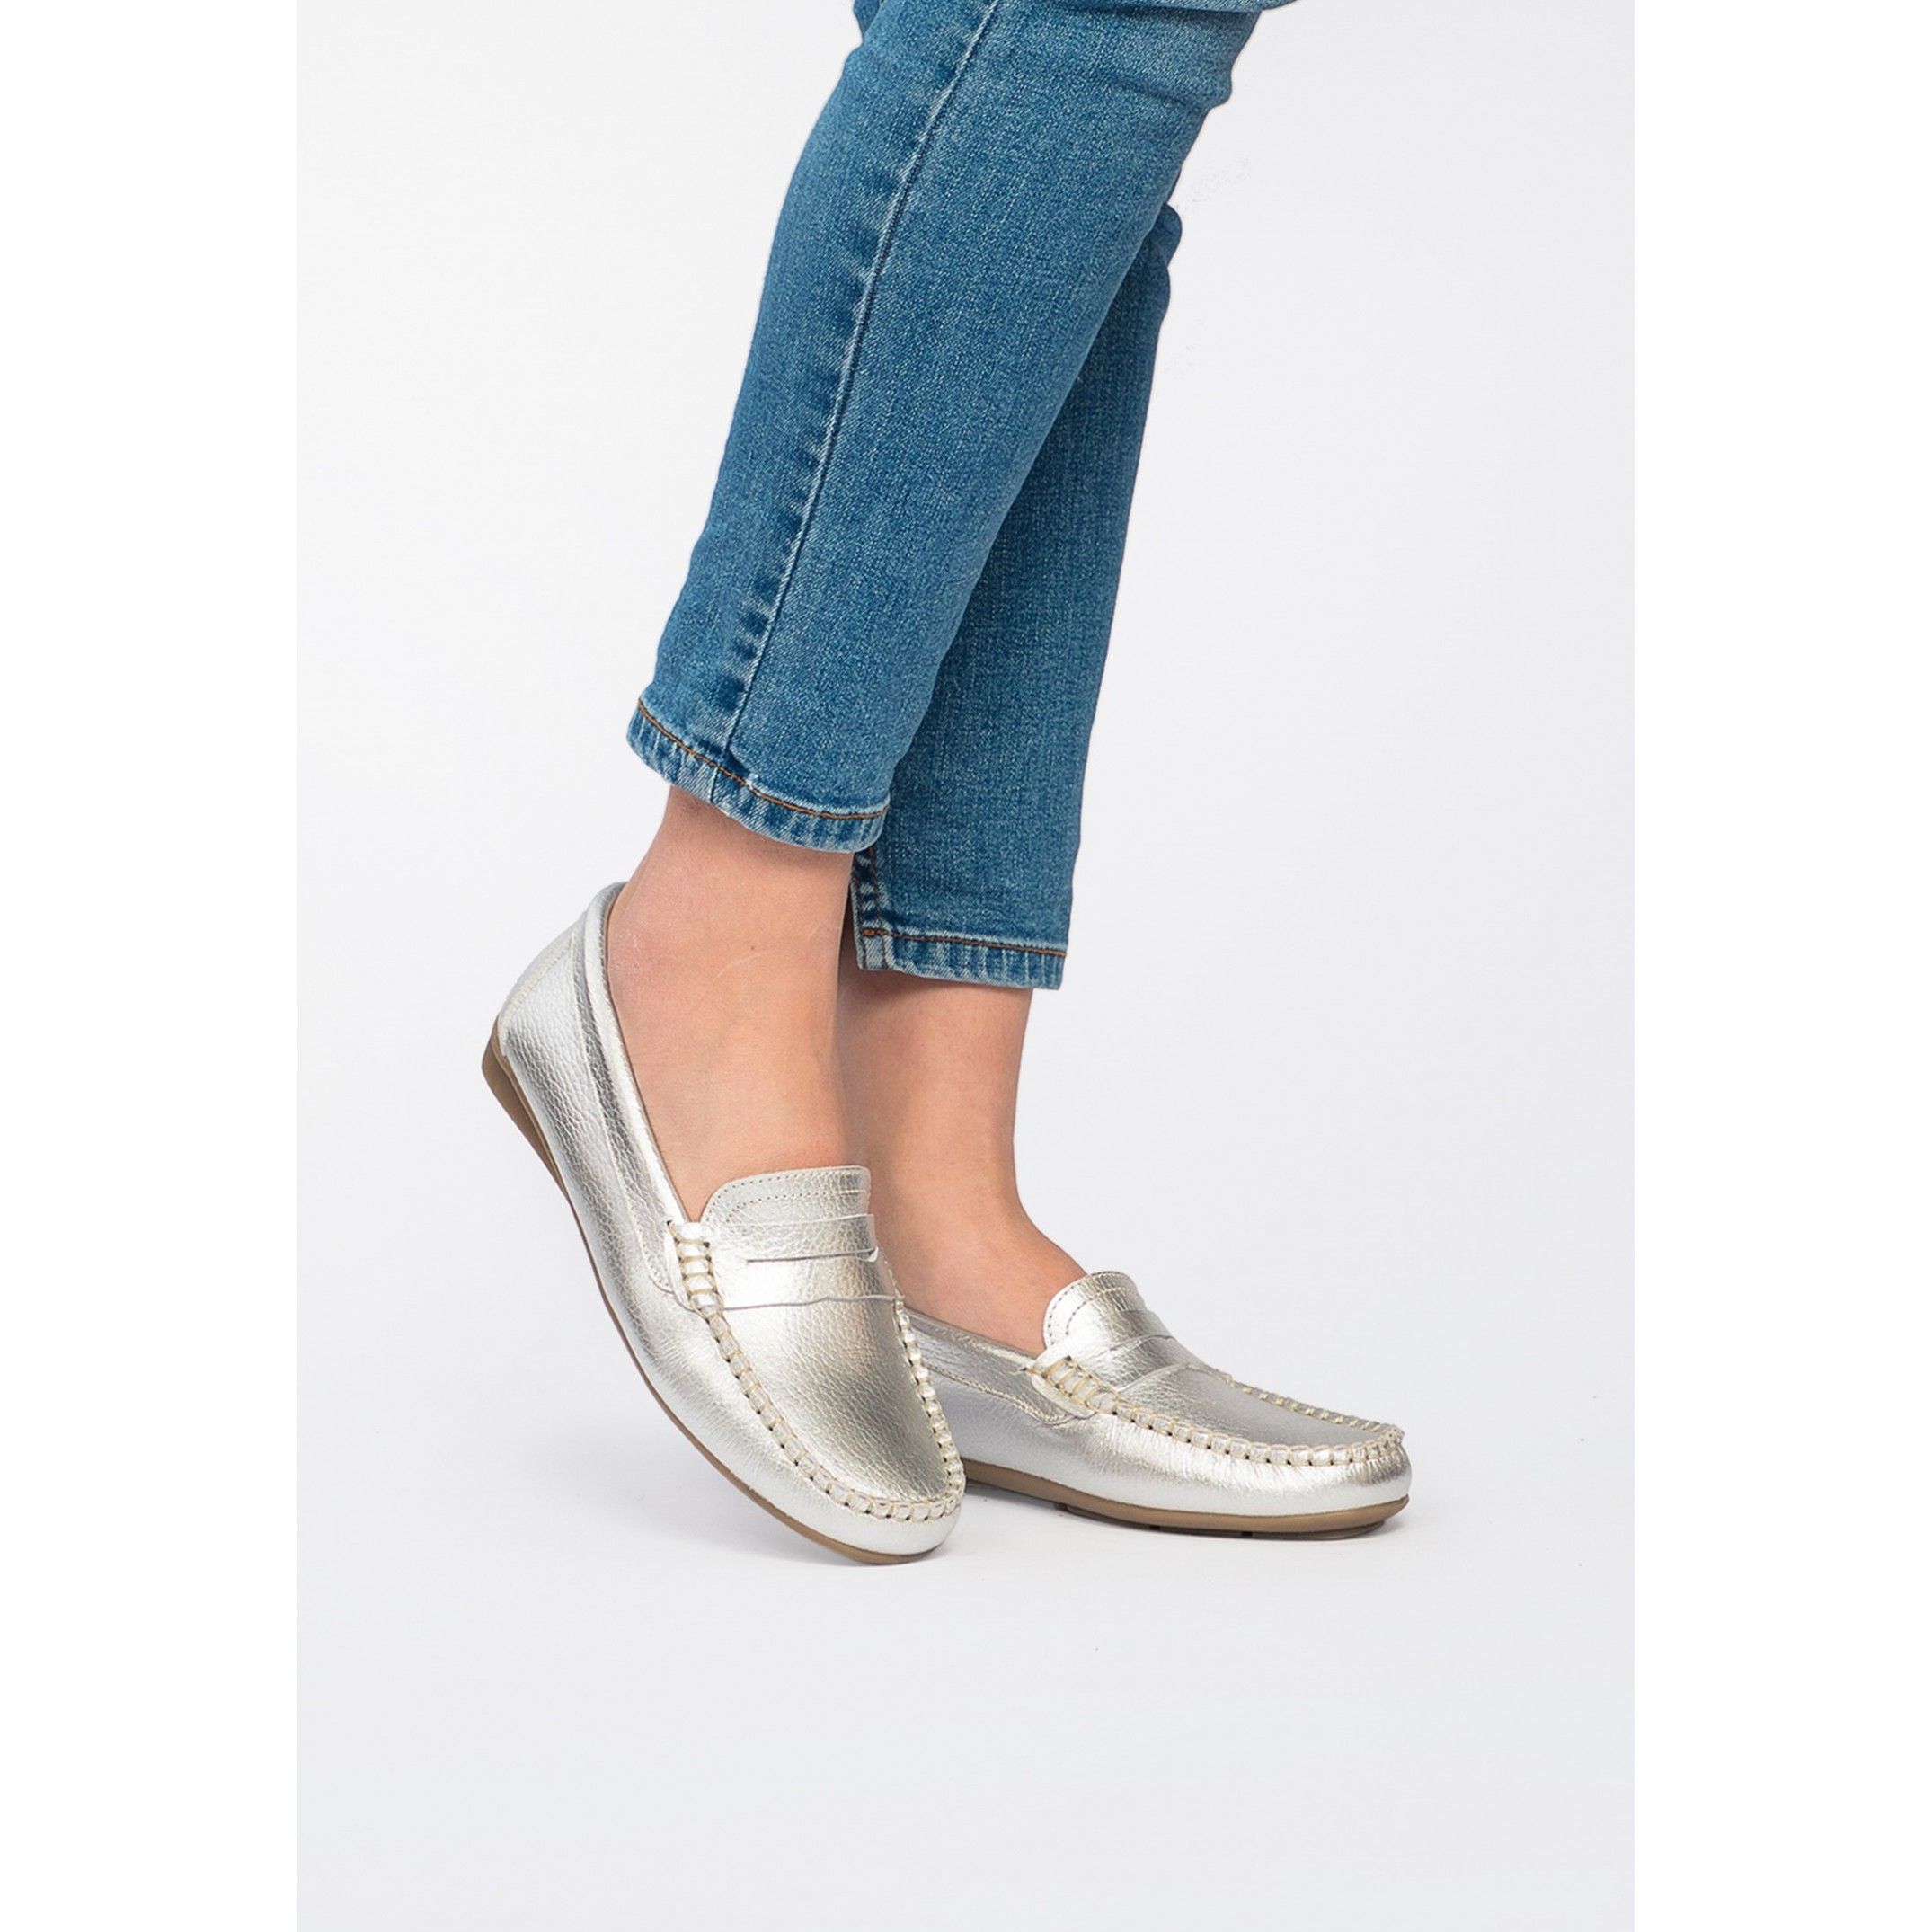 Nappa leather loafers for women, by Son Castellanisimos. Upper made of cowhide leather. Open shoe. Inner lining and insole made of cowhide leather. Sole material: synthetic and non slip. Heel height: 2 cm. Designed and made in Spain.